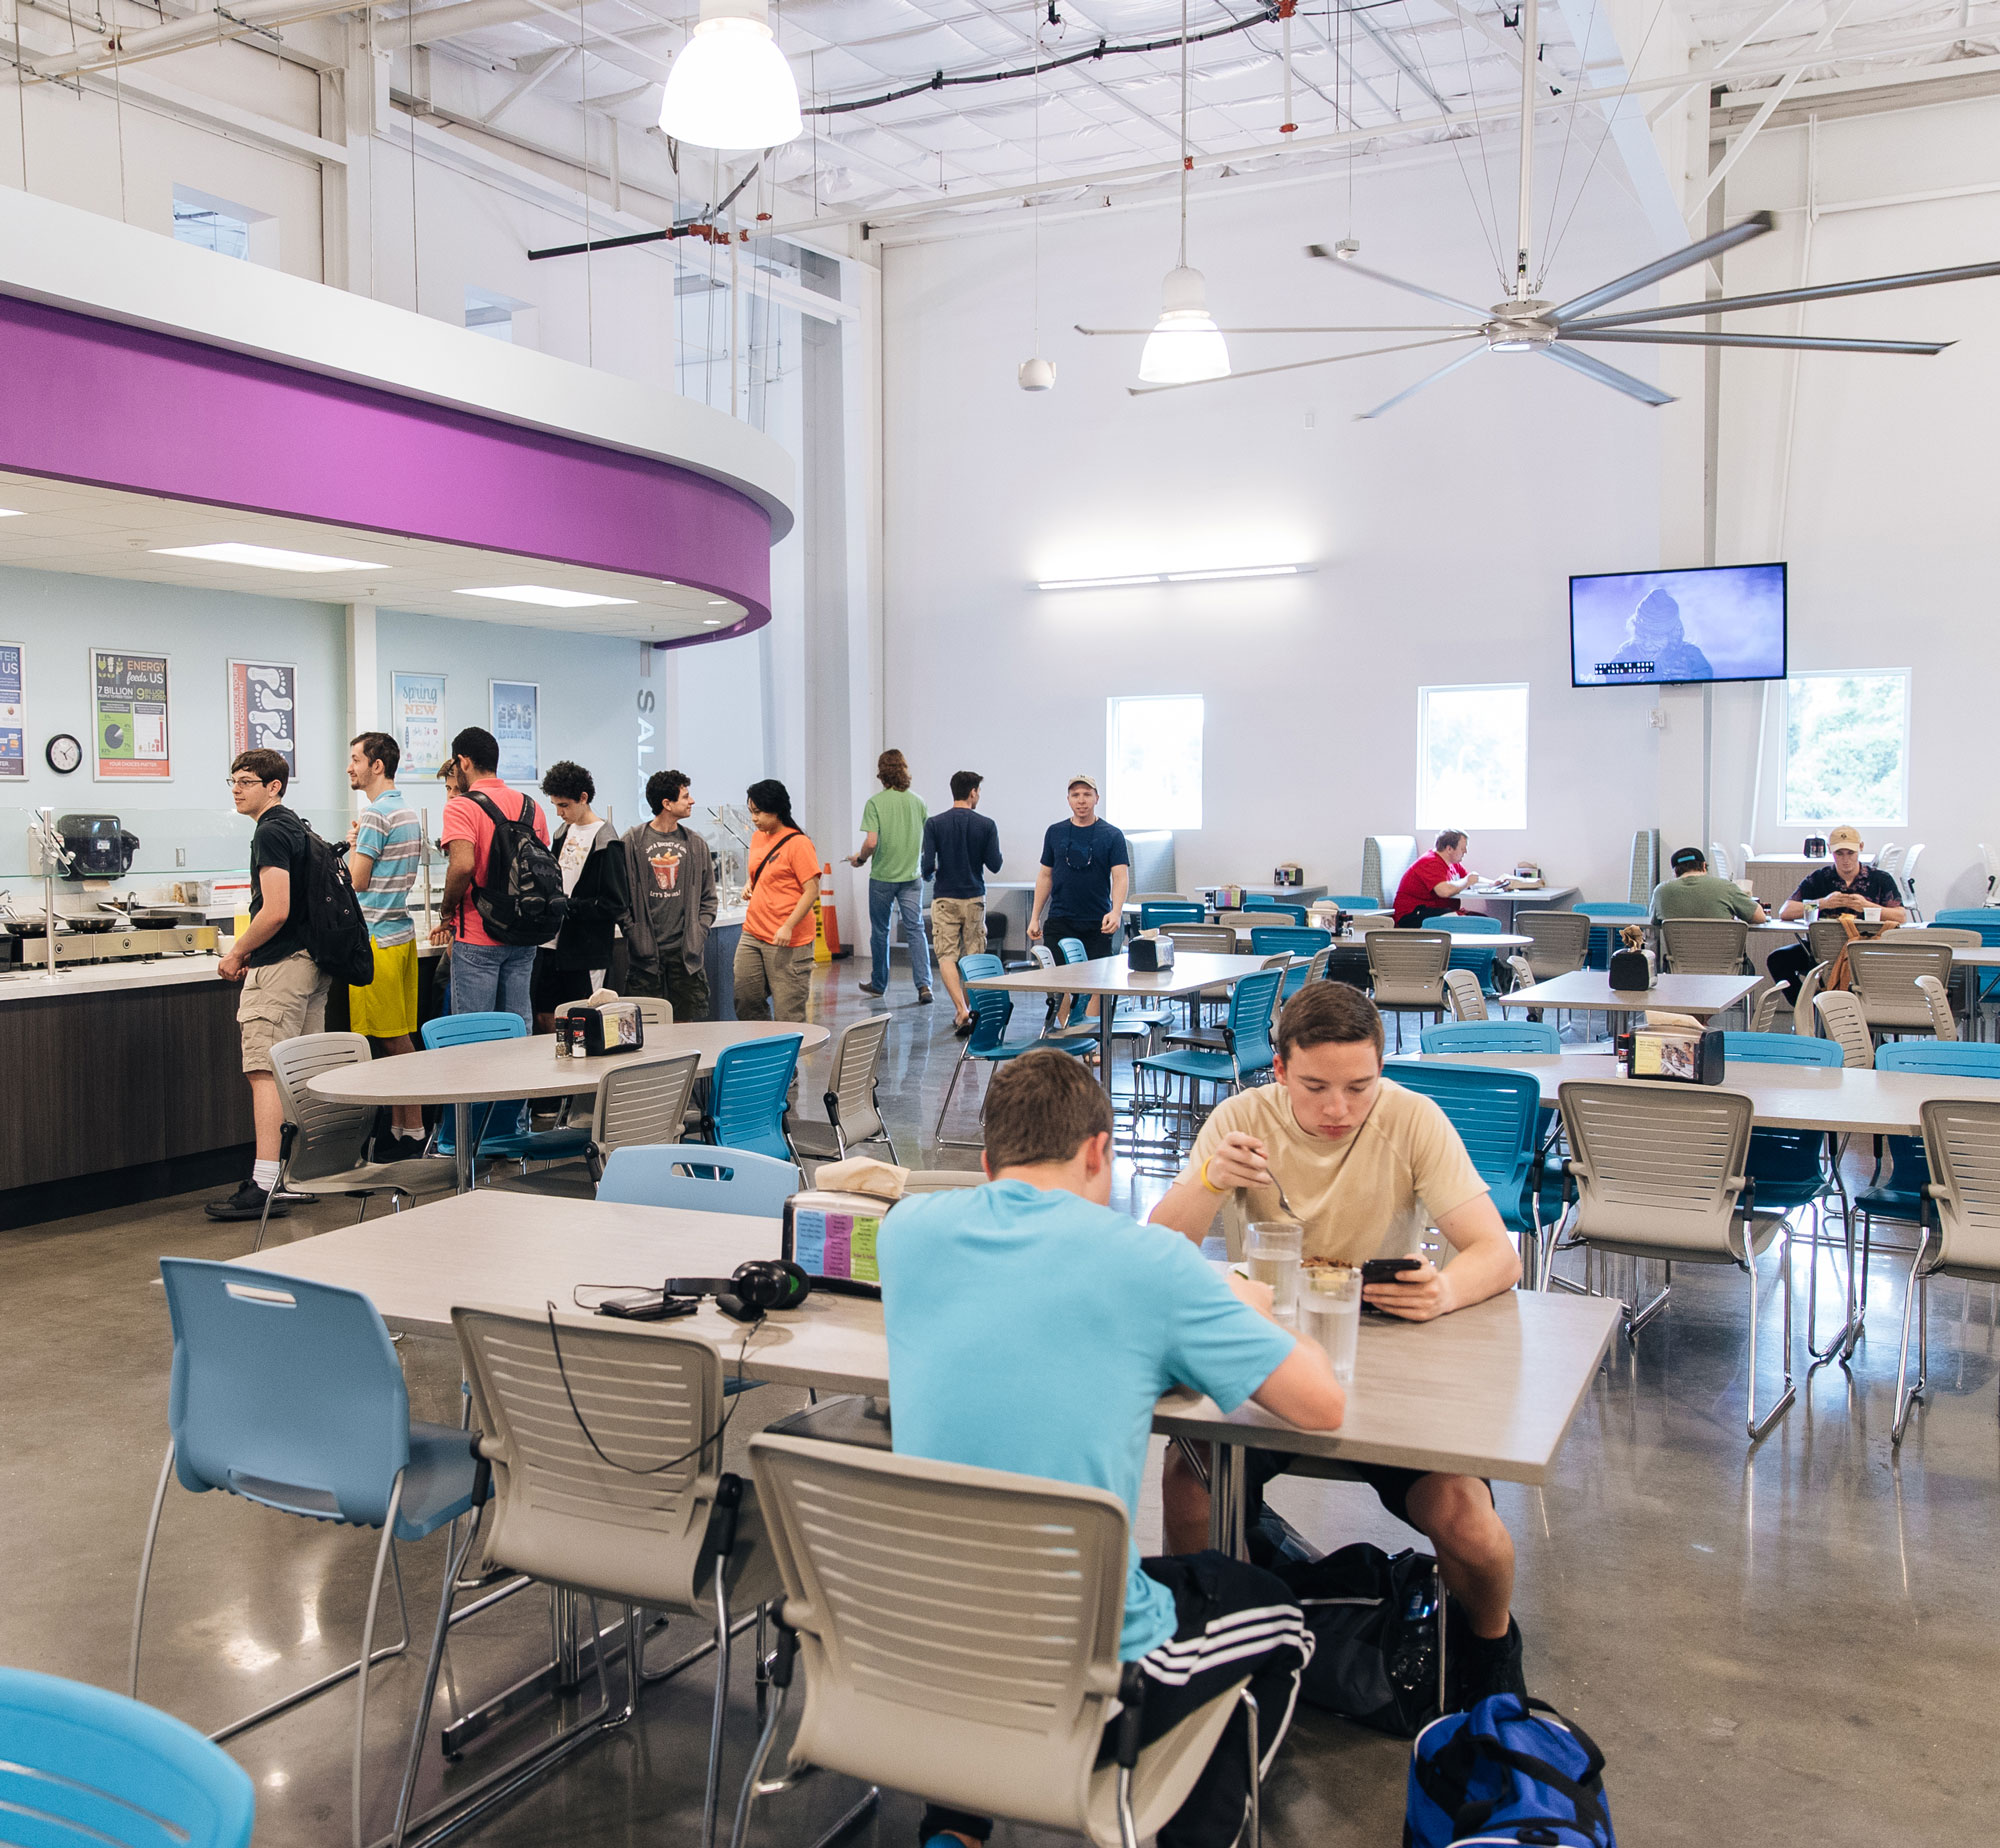 Students in dining center.